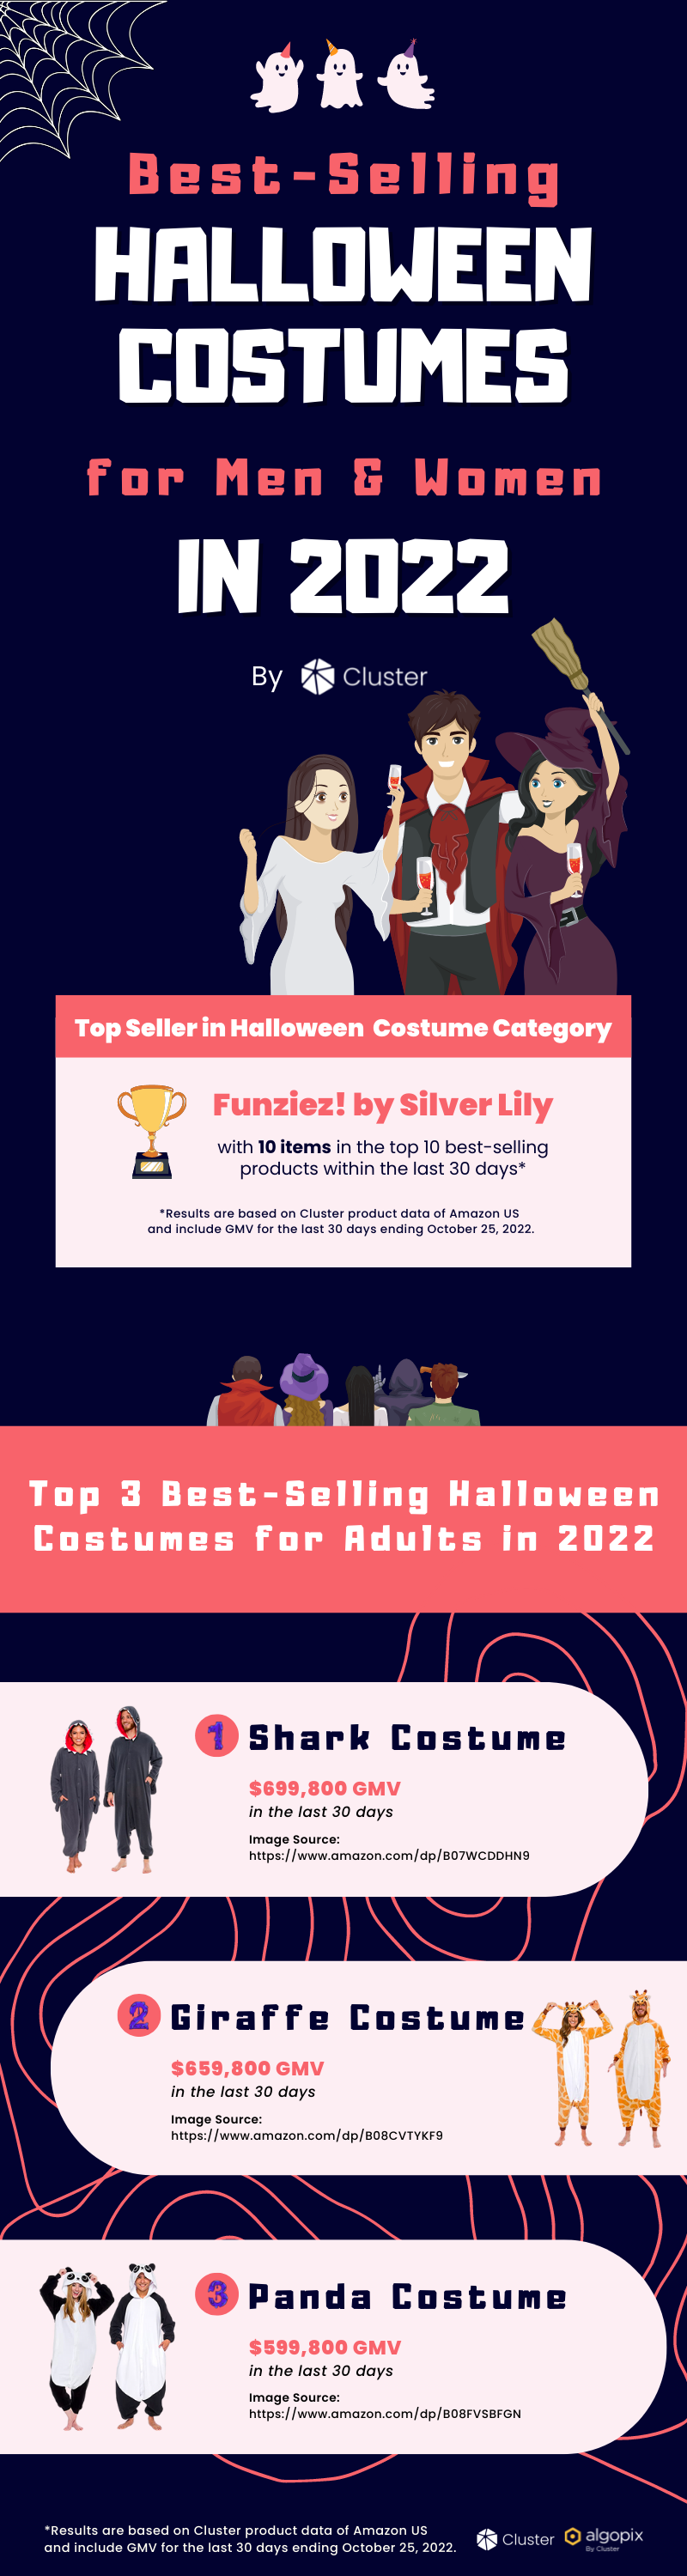 Best-Selling Halloween Costumes for Men & Women by Cluster